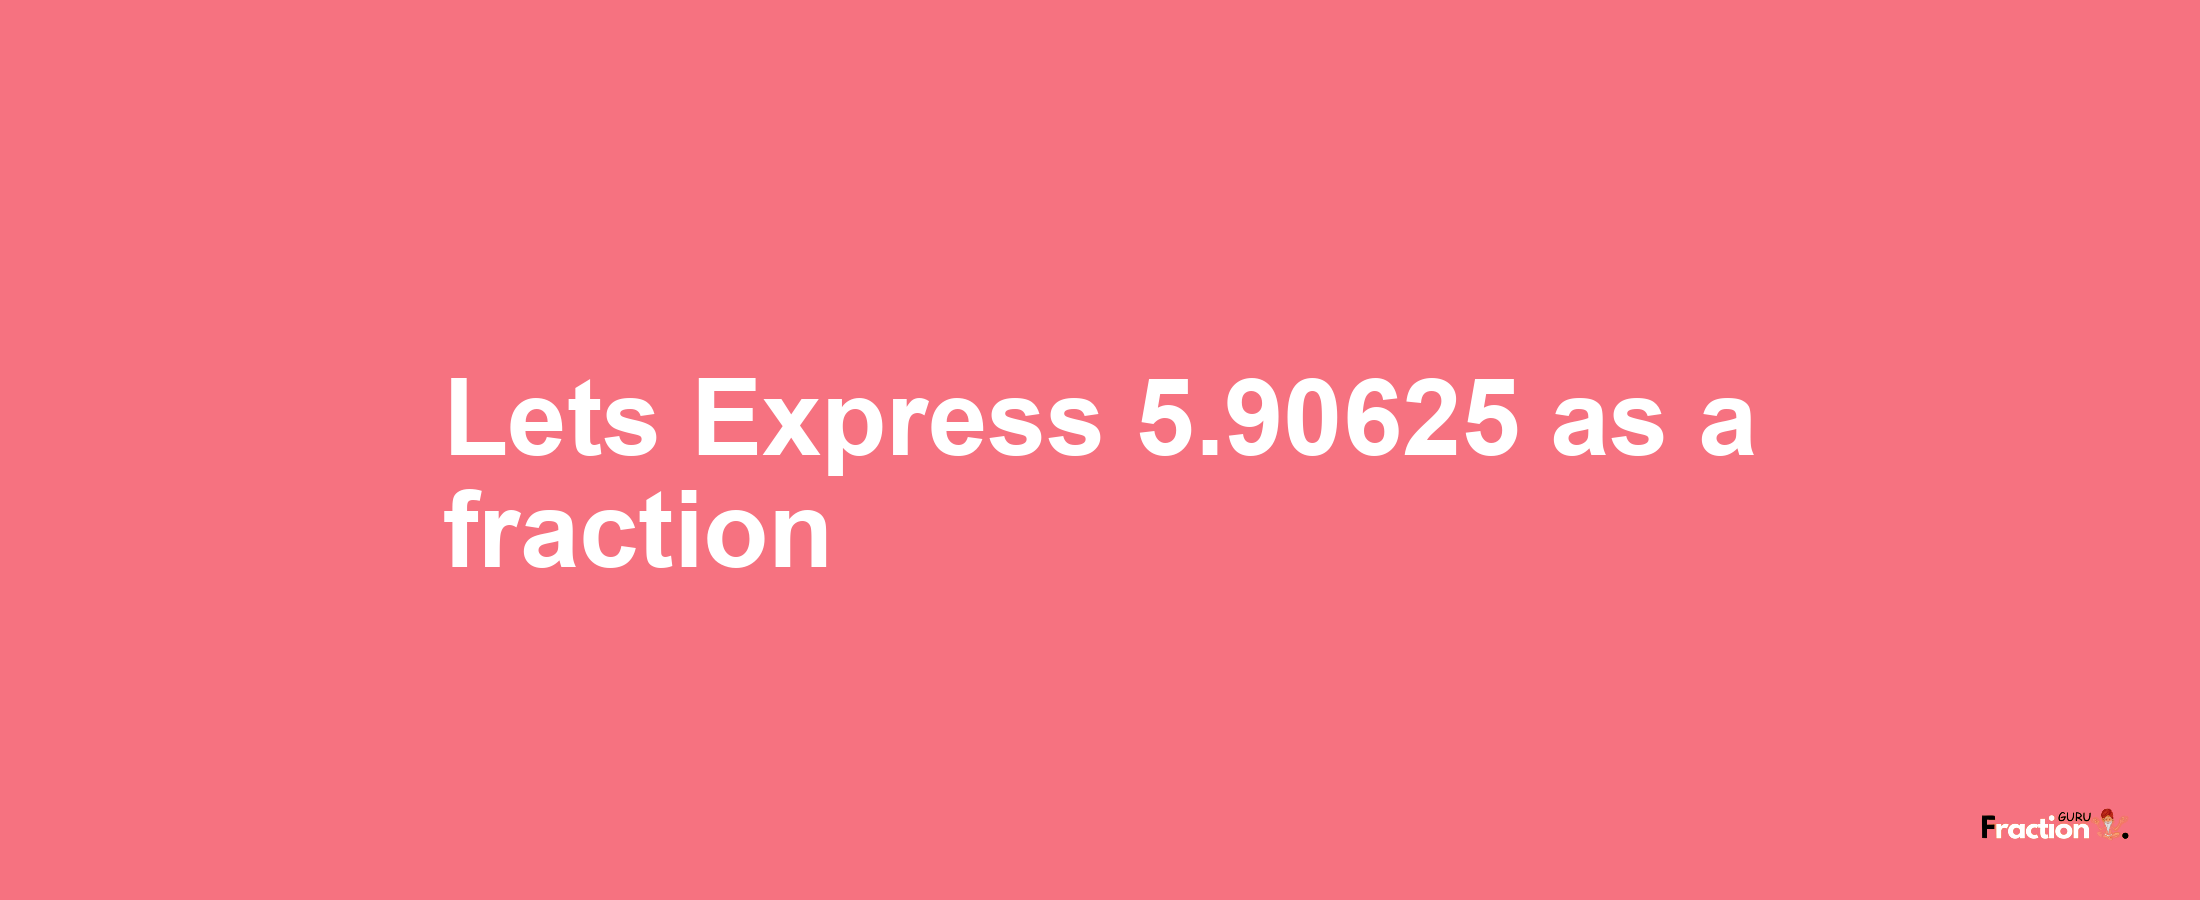 Lets Express 5.90625 as afraction